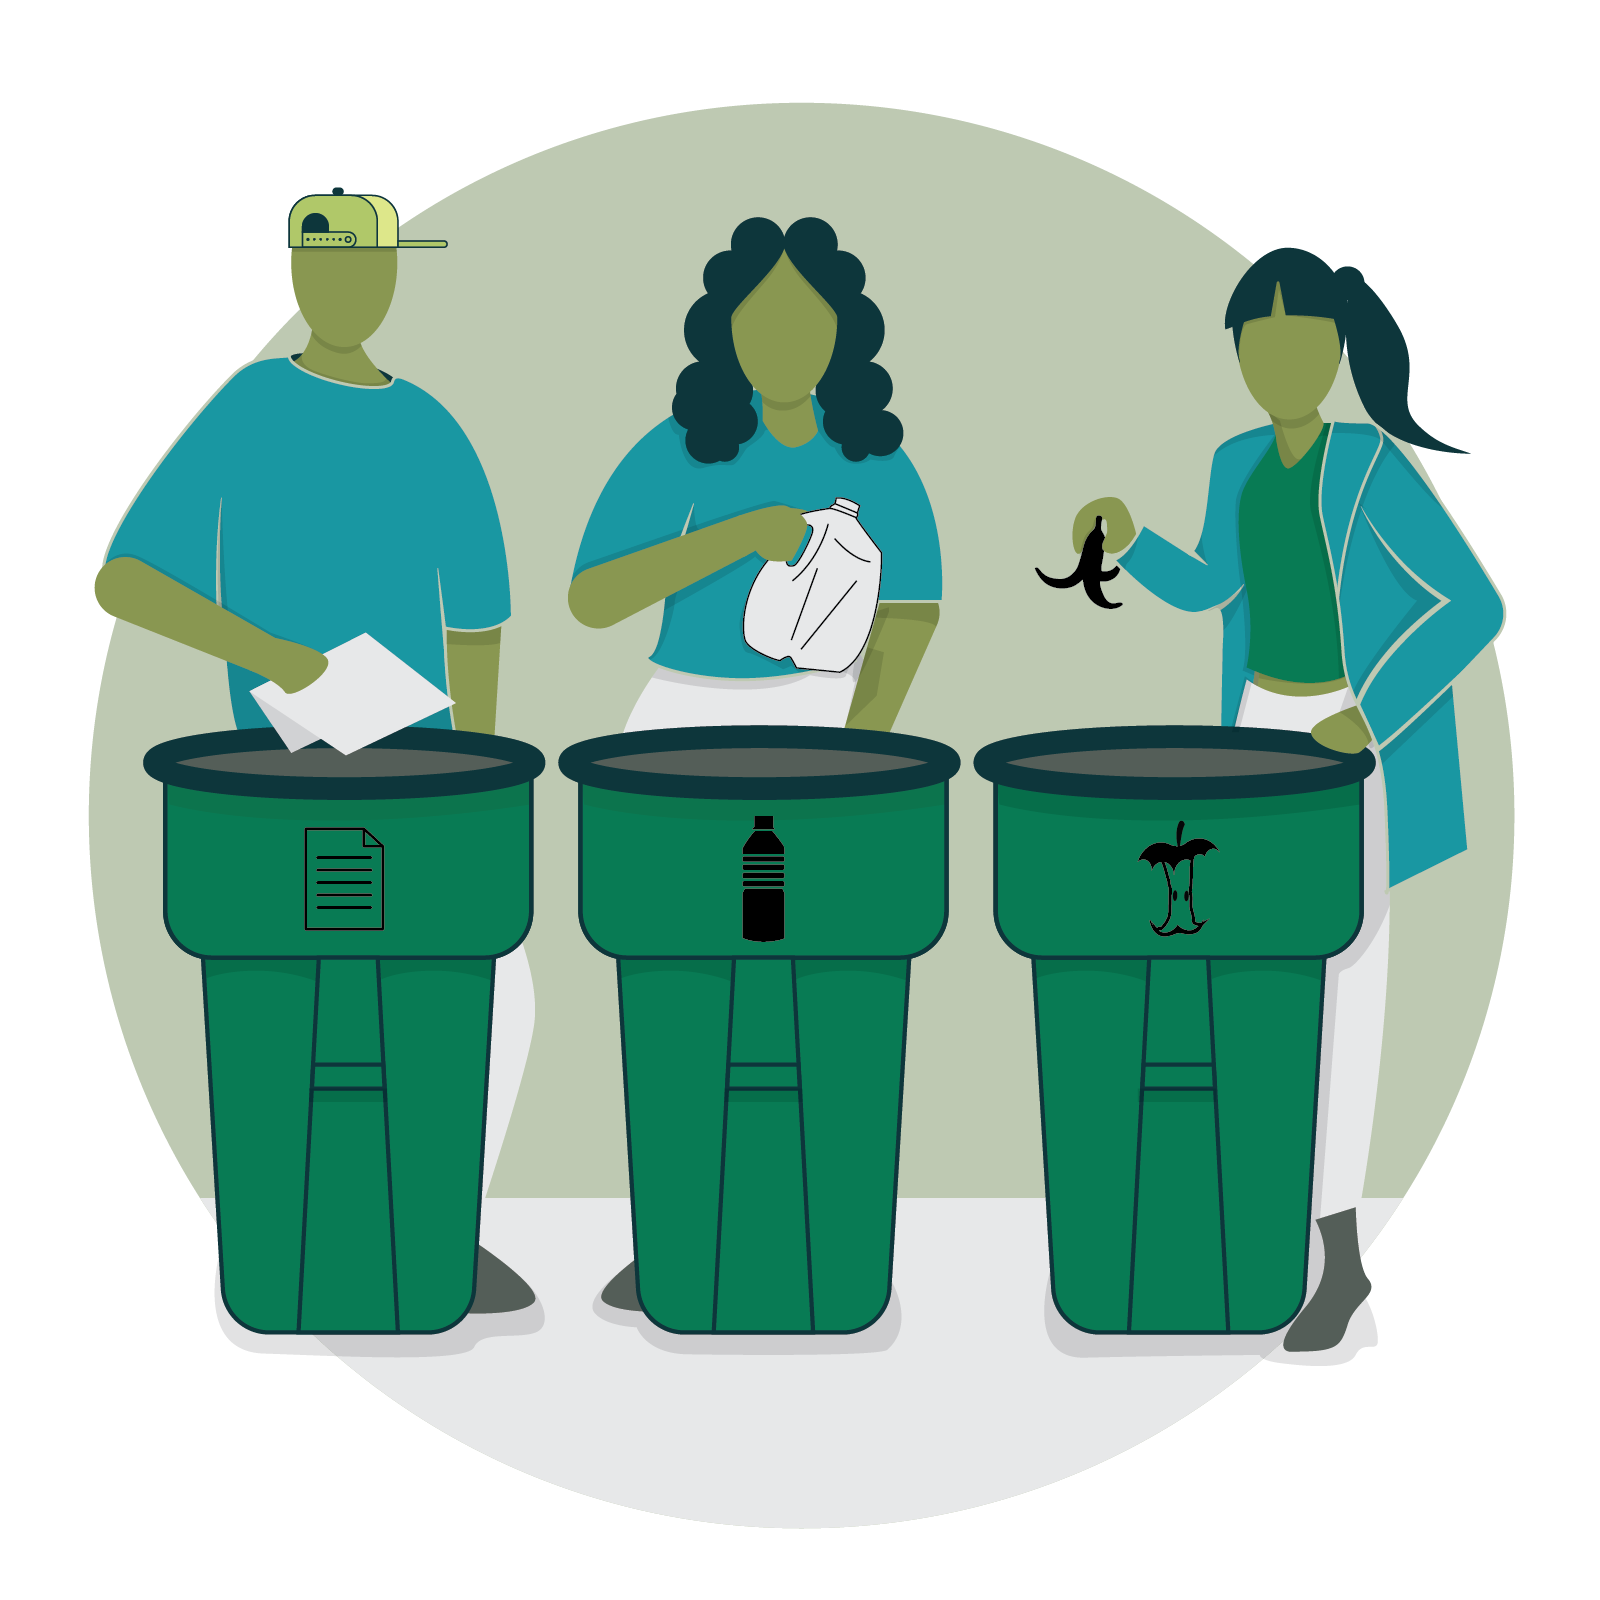 A group of people recycling into appropriate bins